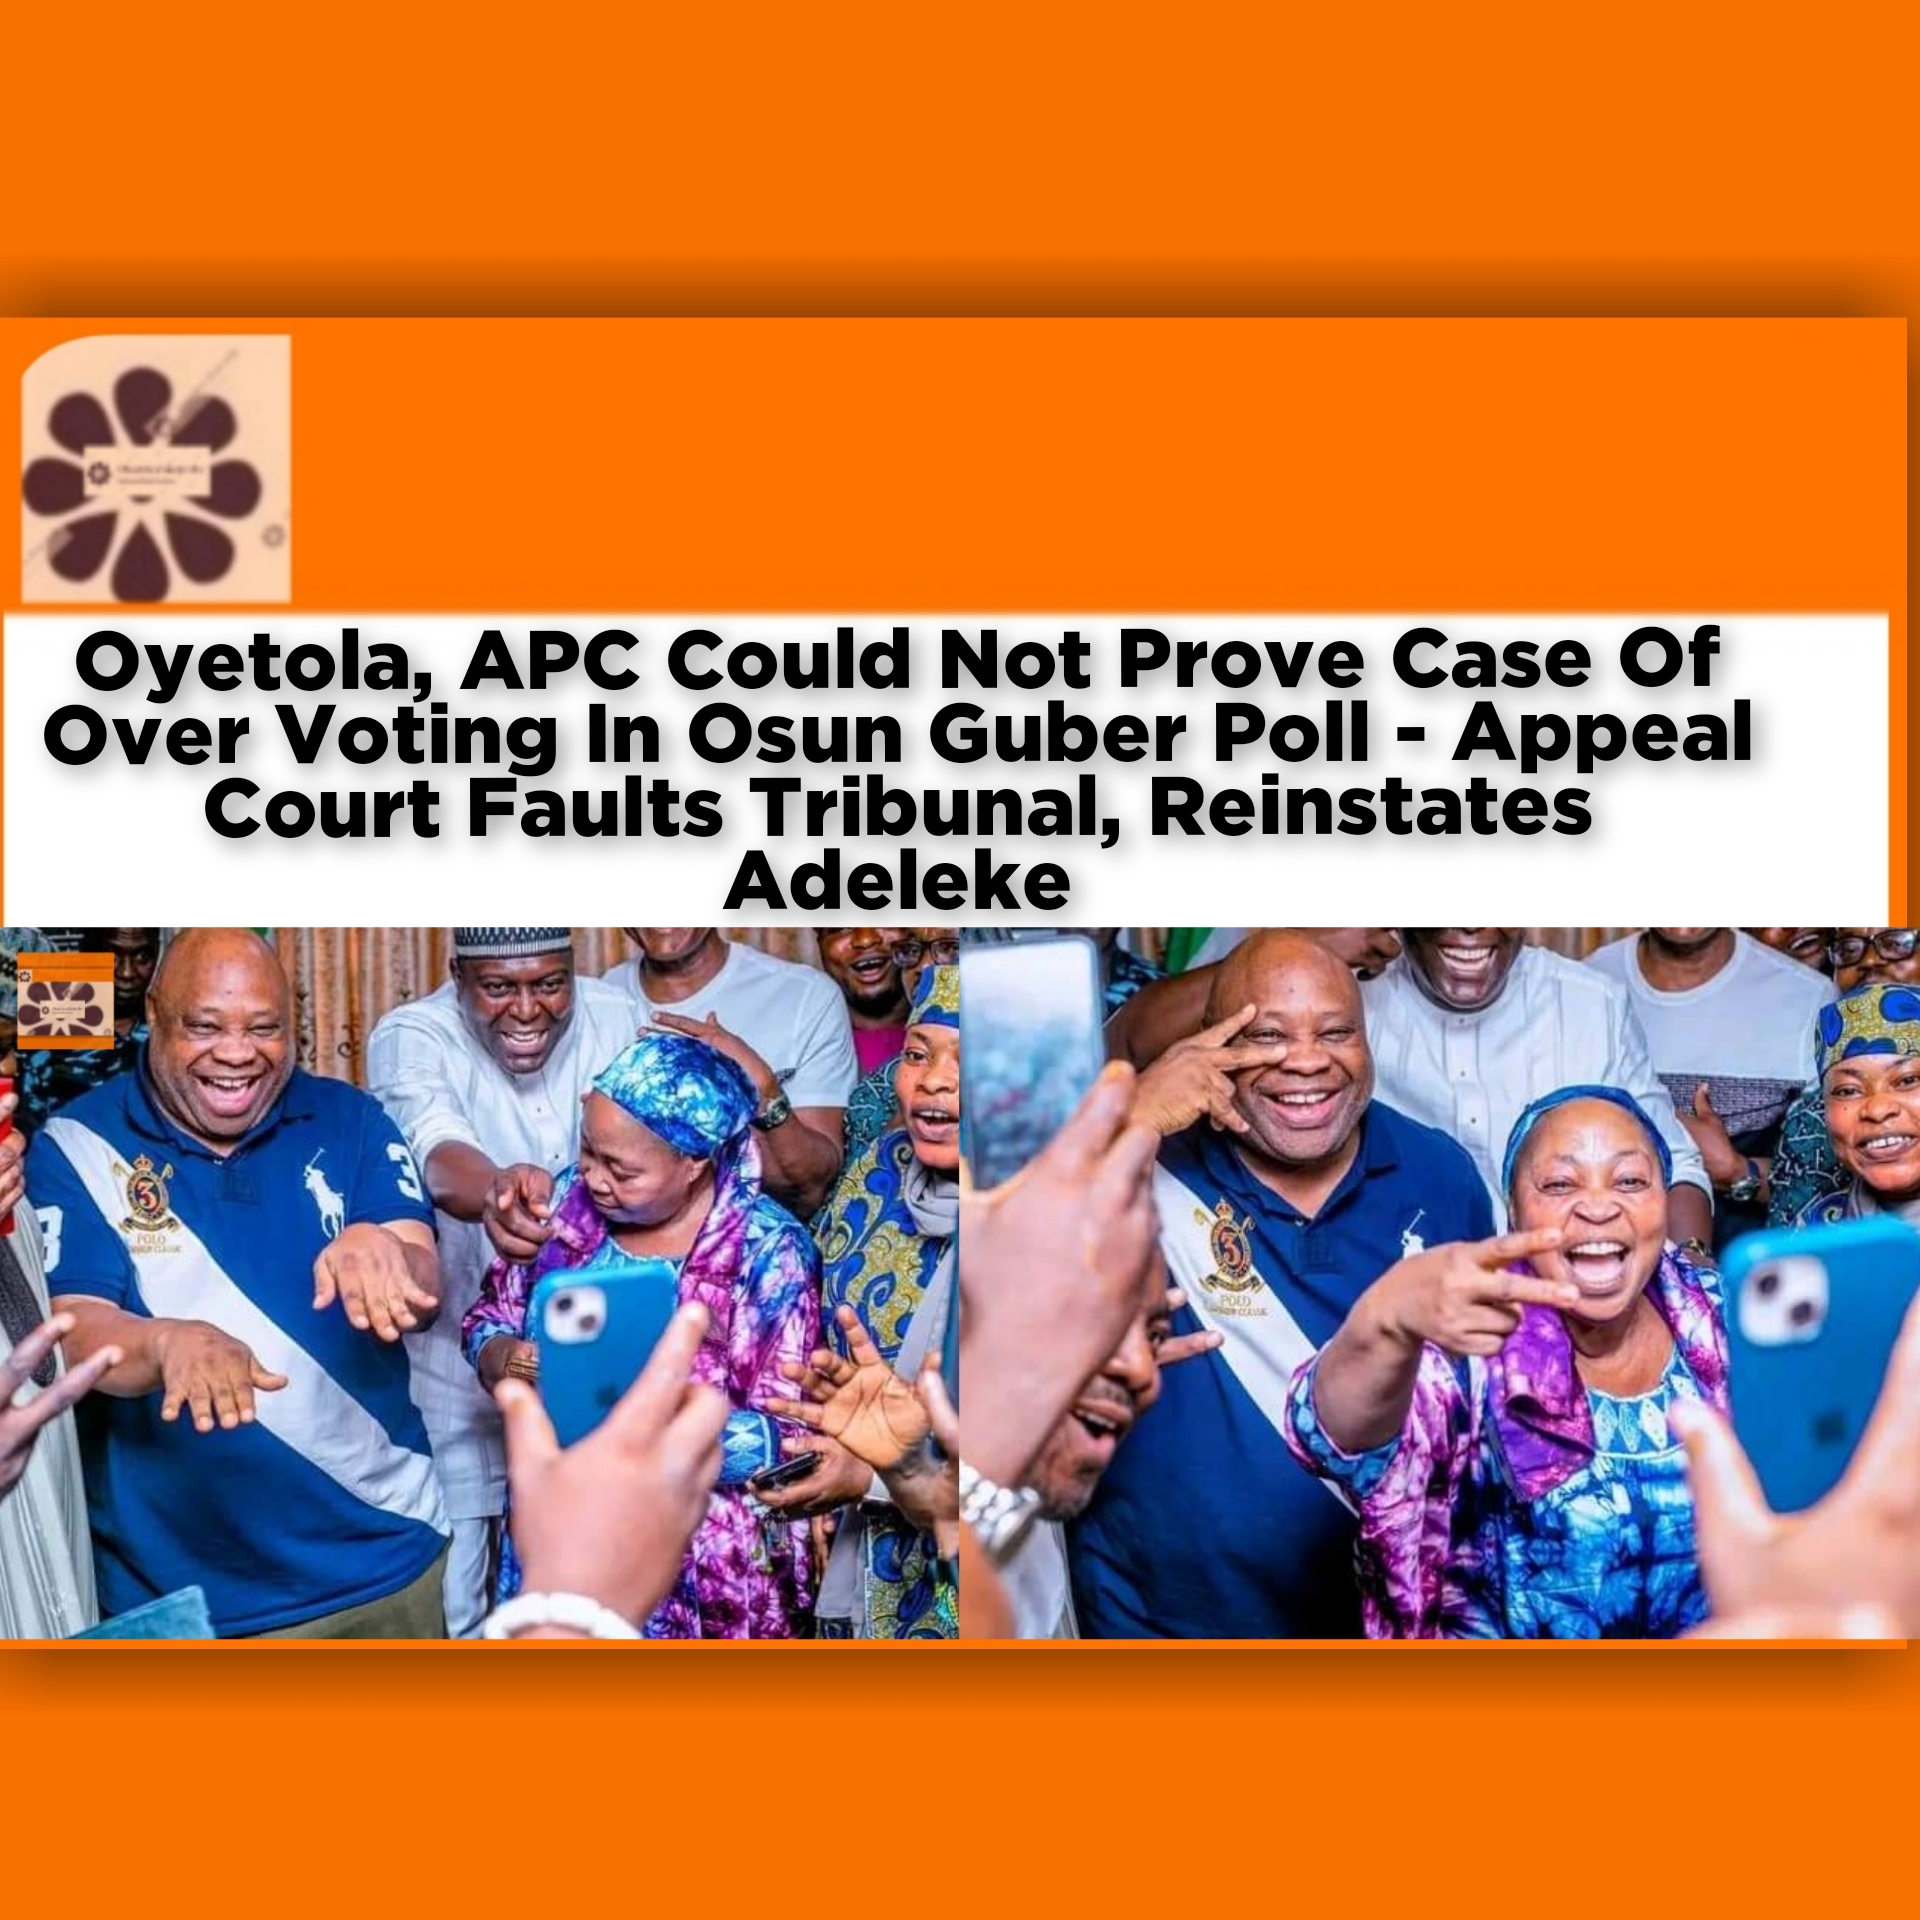 Oyetola, APC Could Not Prove Case Of Over Voting In Osun Guber Poll - Appeal Court Faults Tribunal, Reinstates Adeleke ~ OsazuwaAkonedo #LP